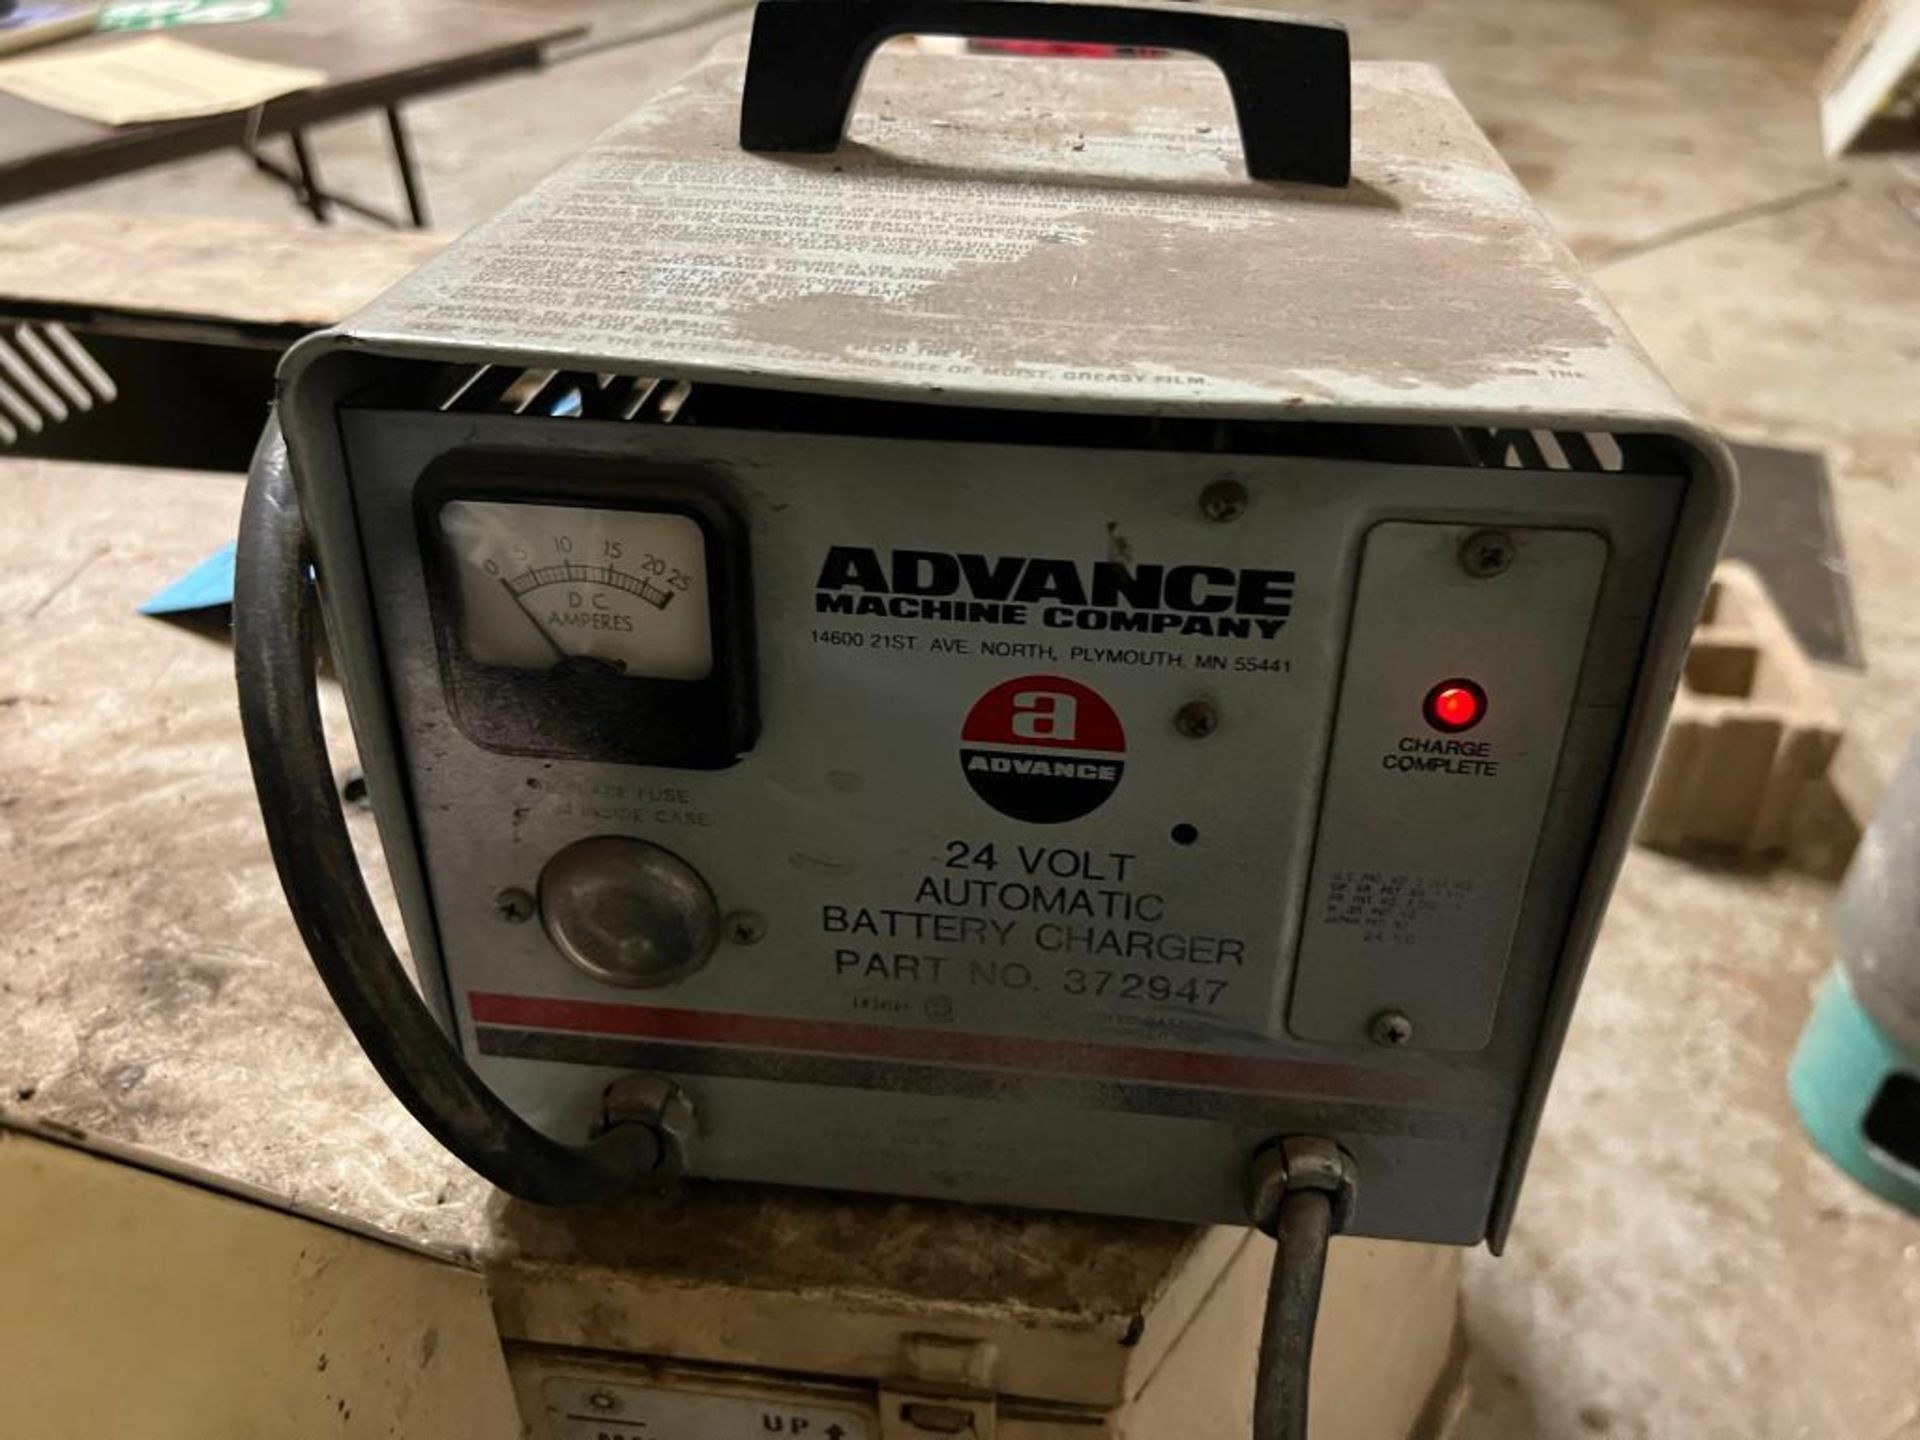 Advance 360B Walk Behind Floor Machine with Charger, Retriever 36 (Needs Batteries) - Image 4 of 5